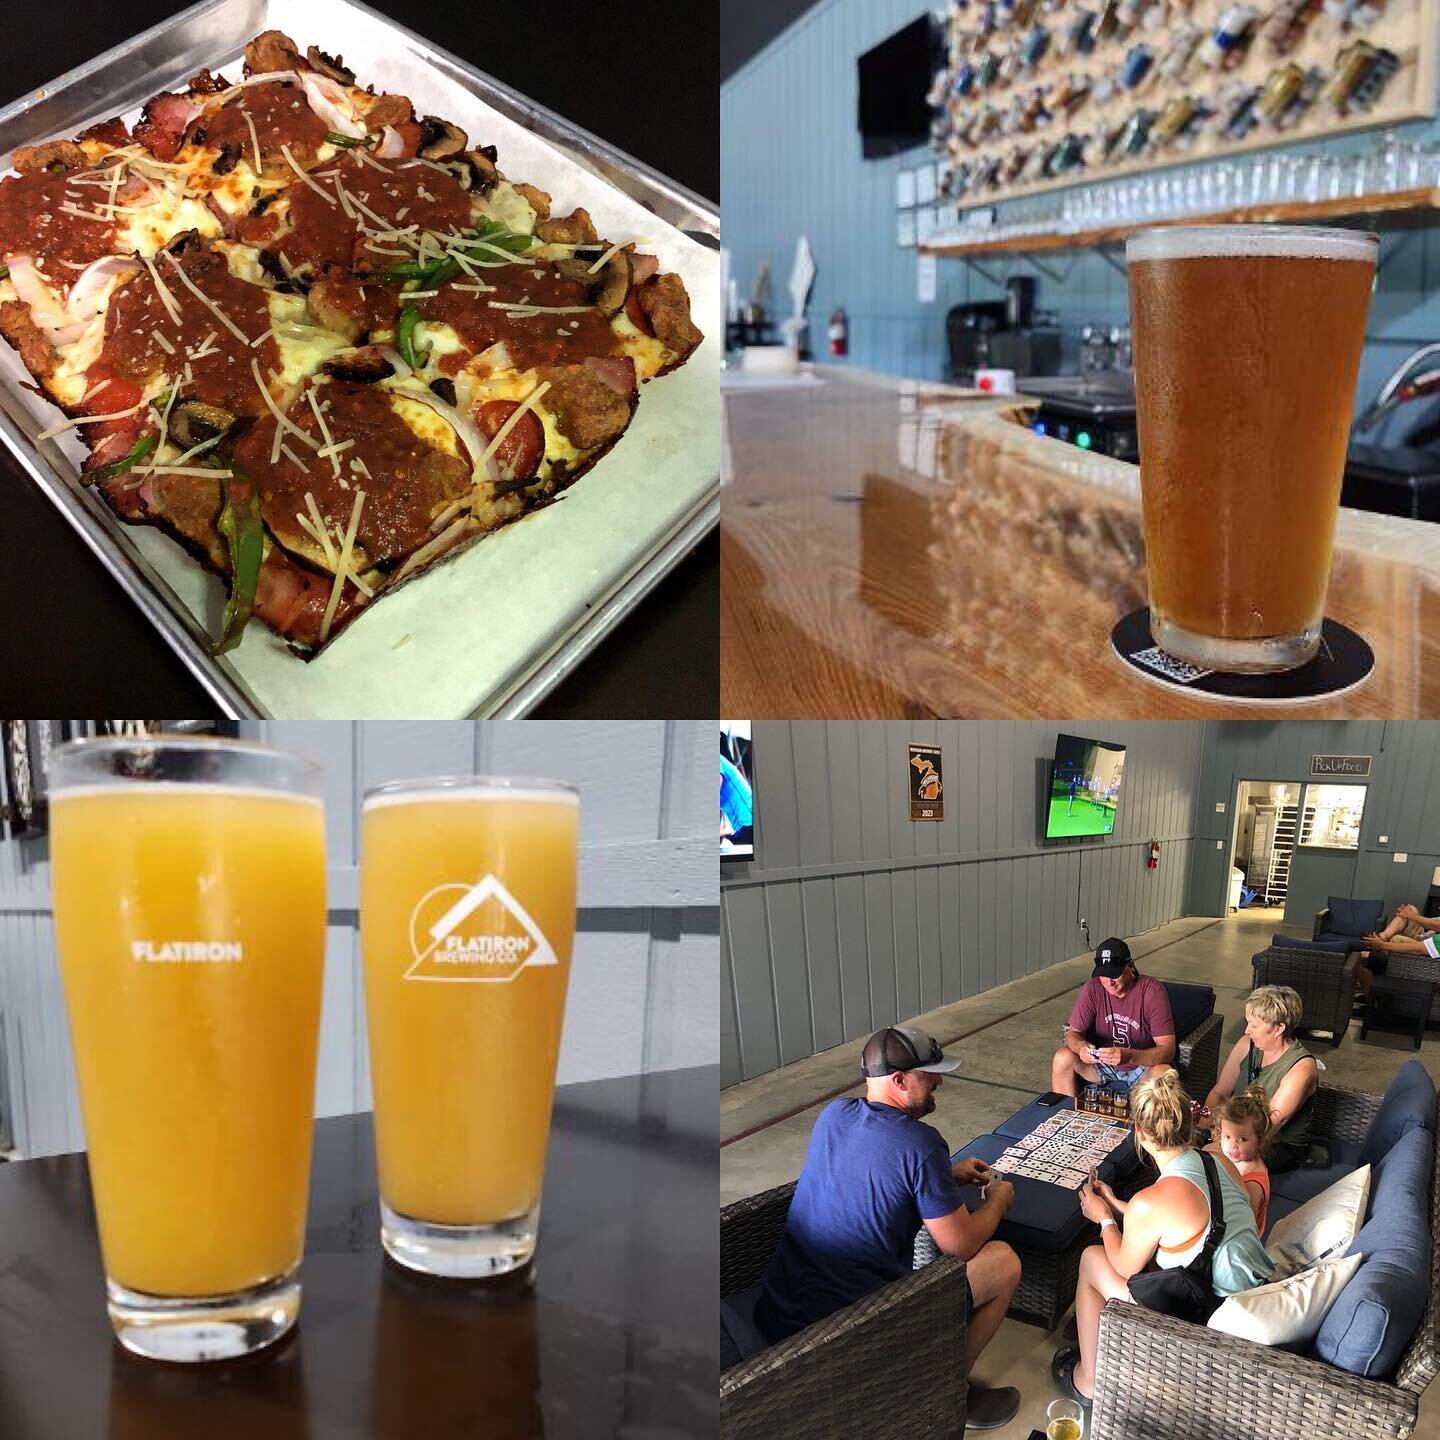 Lots going on at Flatiron! Two new beers on tap along with the return of American IPA!  Grab a beer and grub from 3-9 today!  #manistique #craftbeer